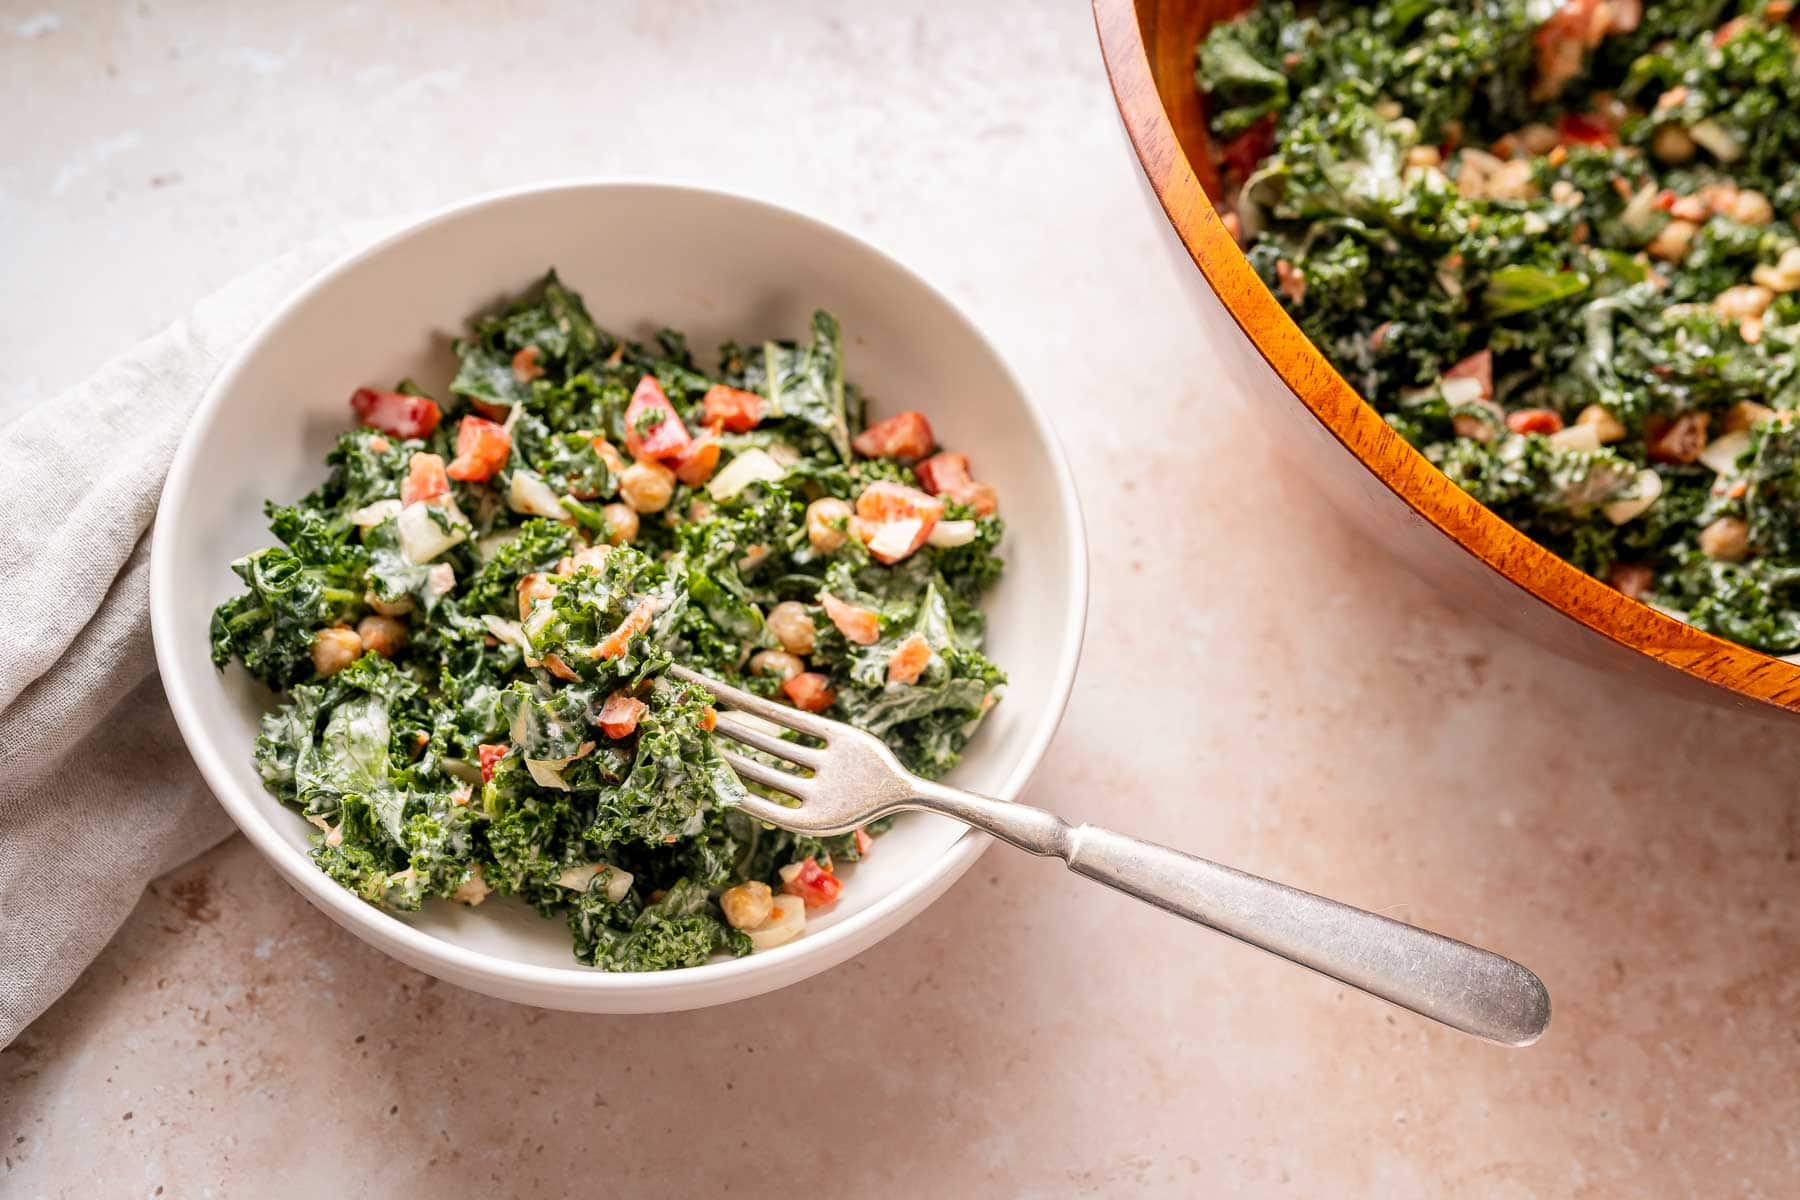 A small white bowl of kale salad rests on a tan table next to a large wood salad bowl.